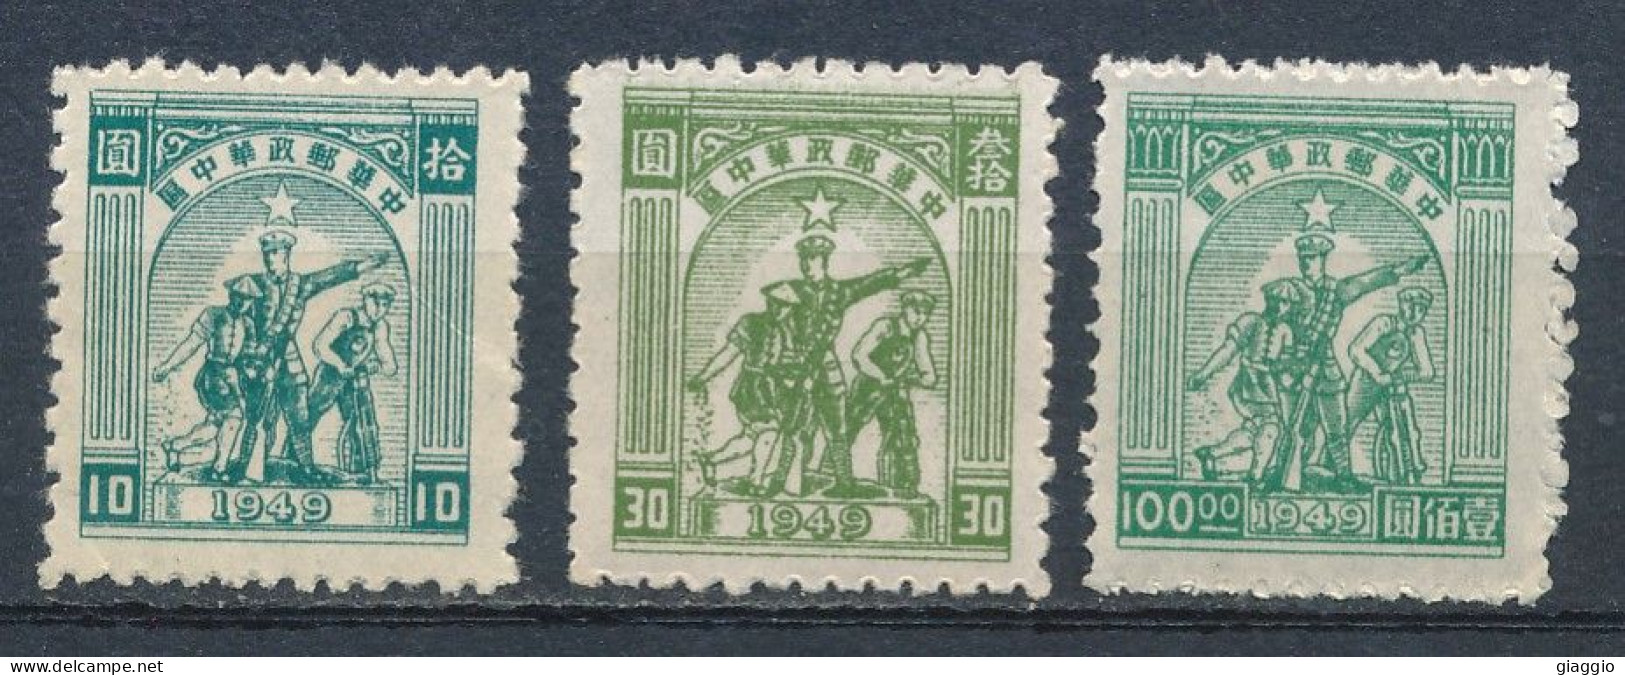 °°° LOT CINA CHINA CENTRALE - Y&T N°65/67/74 - 1949 °°° - Central China 1948-49